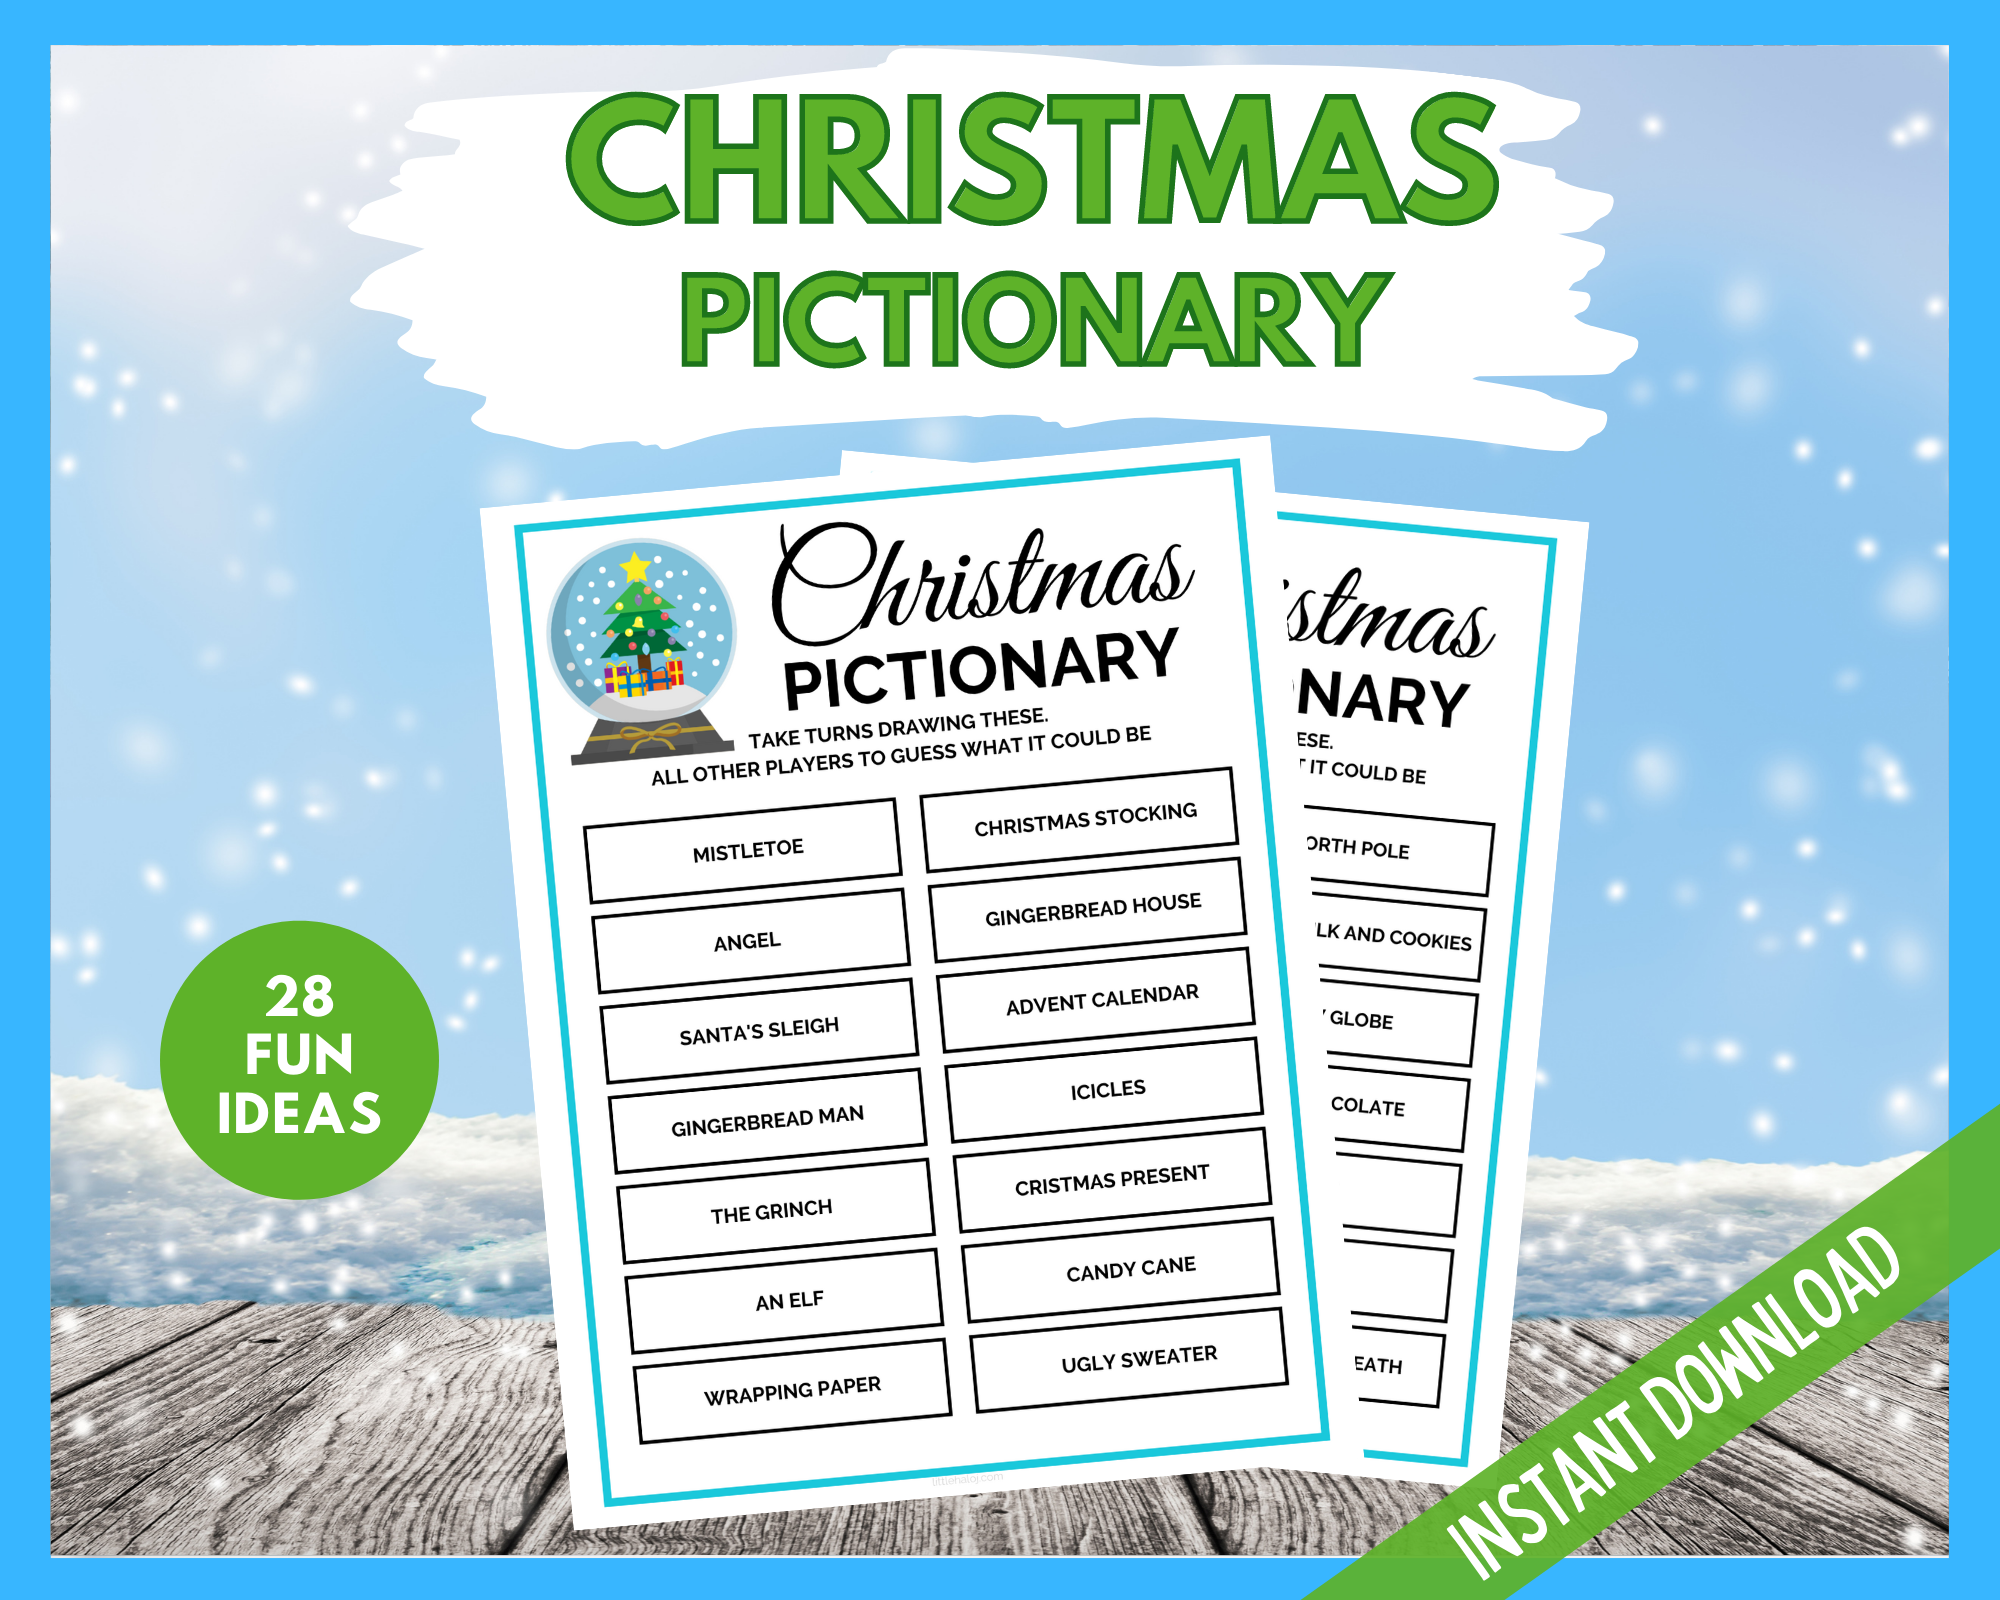 Free Printable Summer Pictionary Game  Pictionary words, Pictionary,  Pictionary for kids